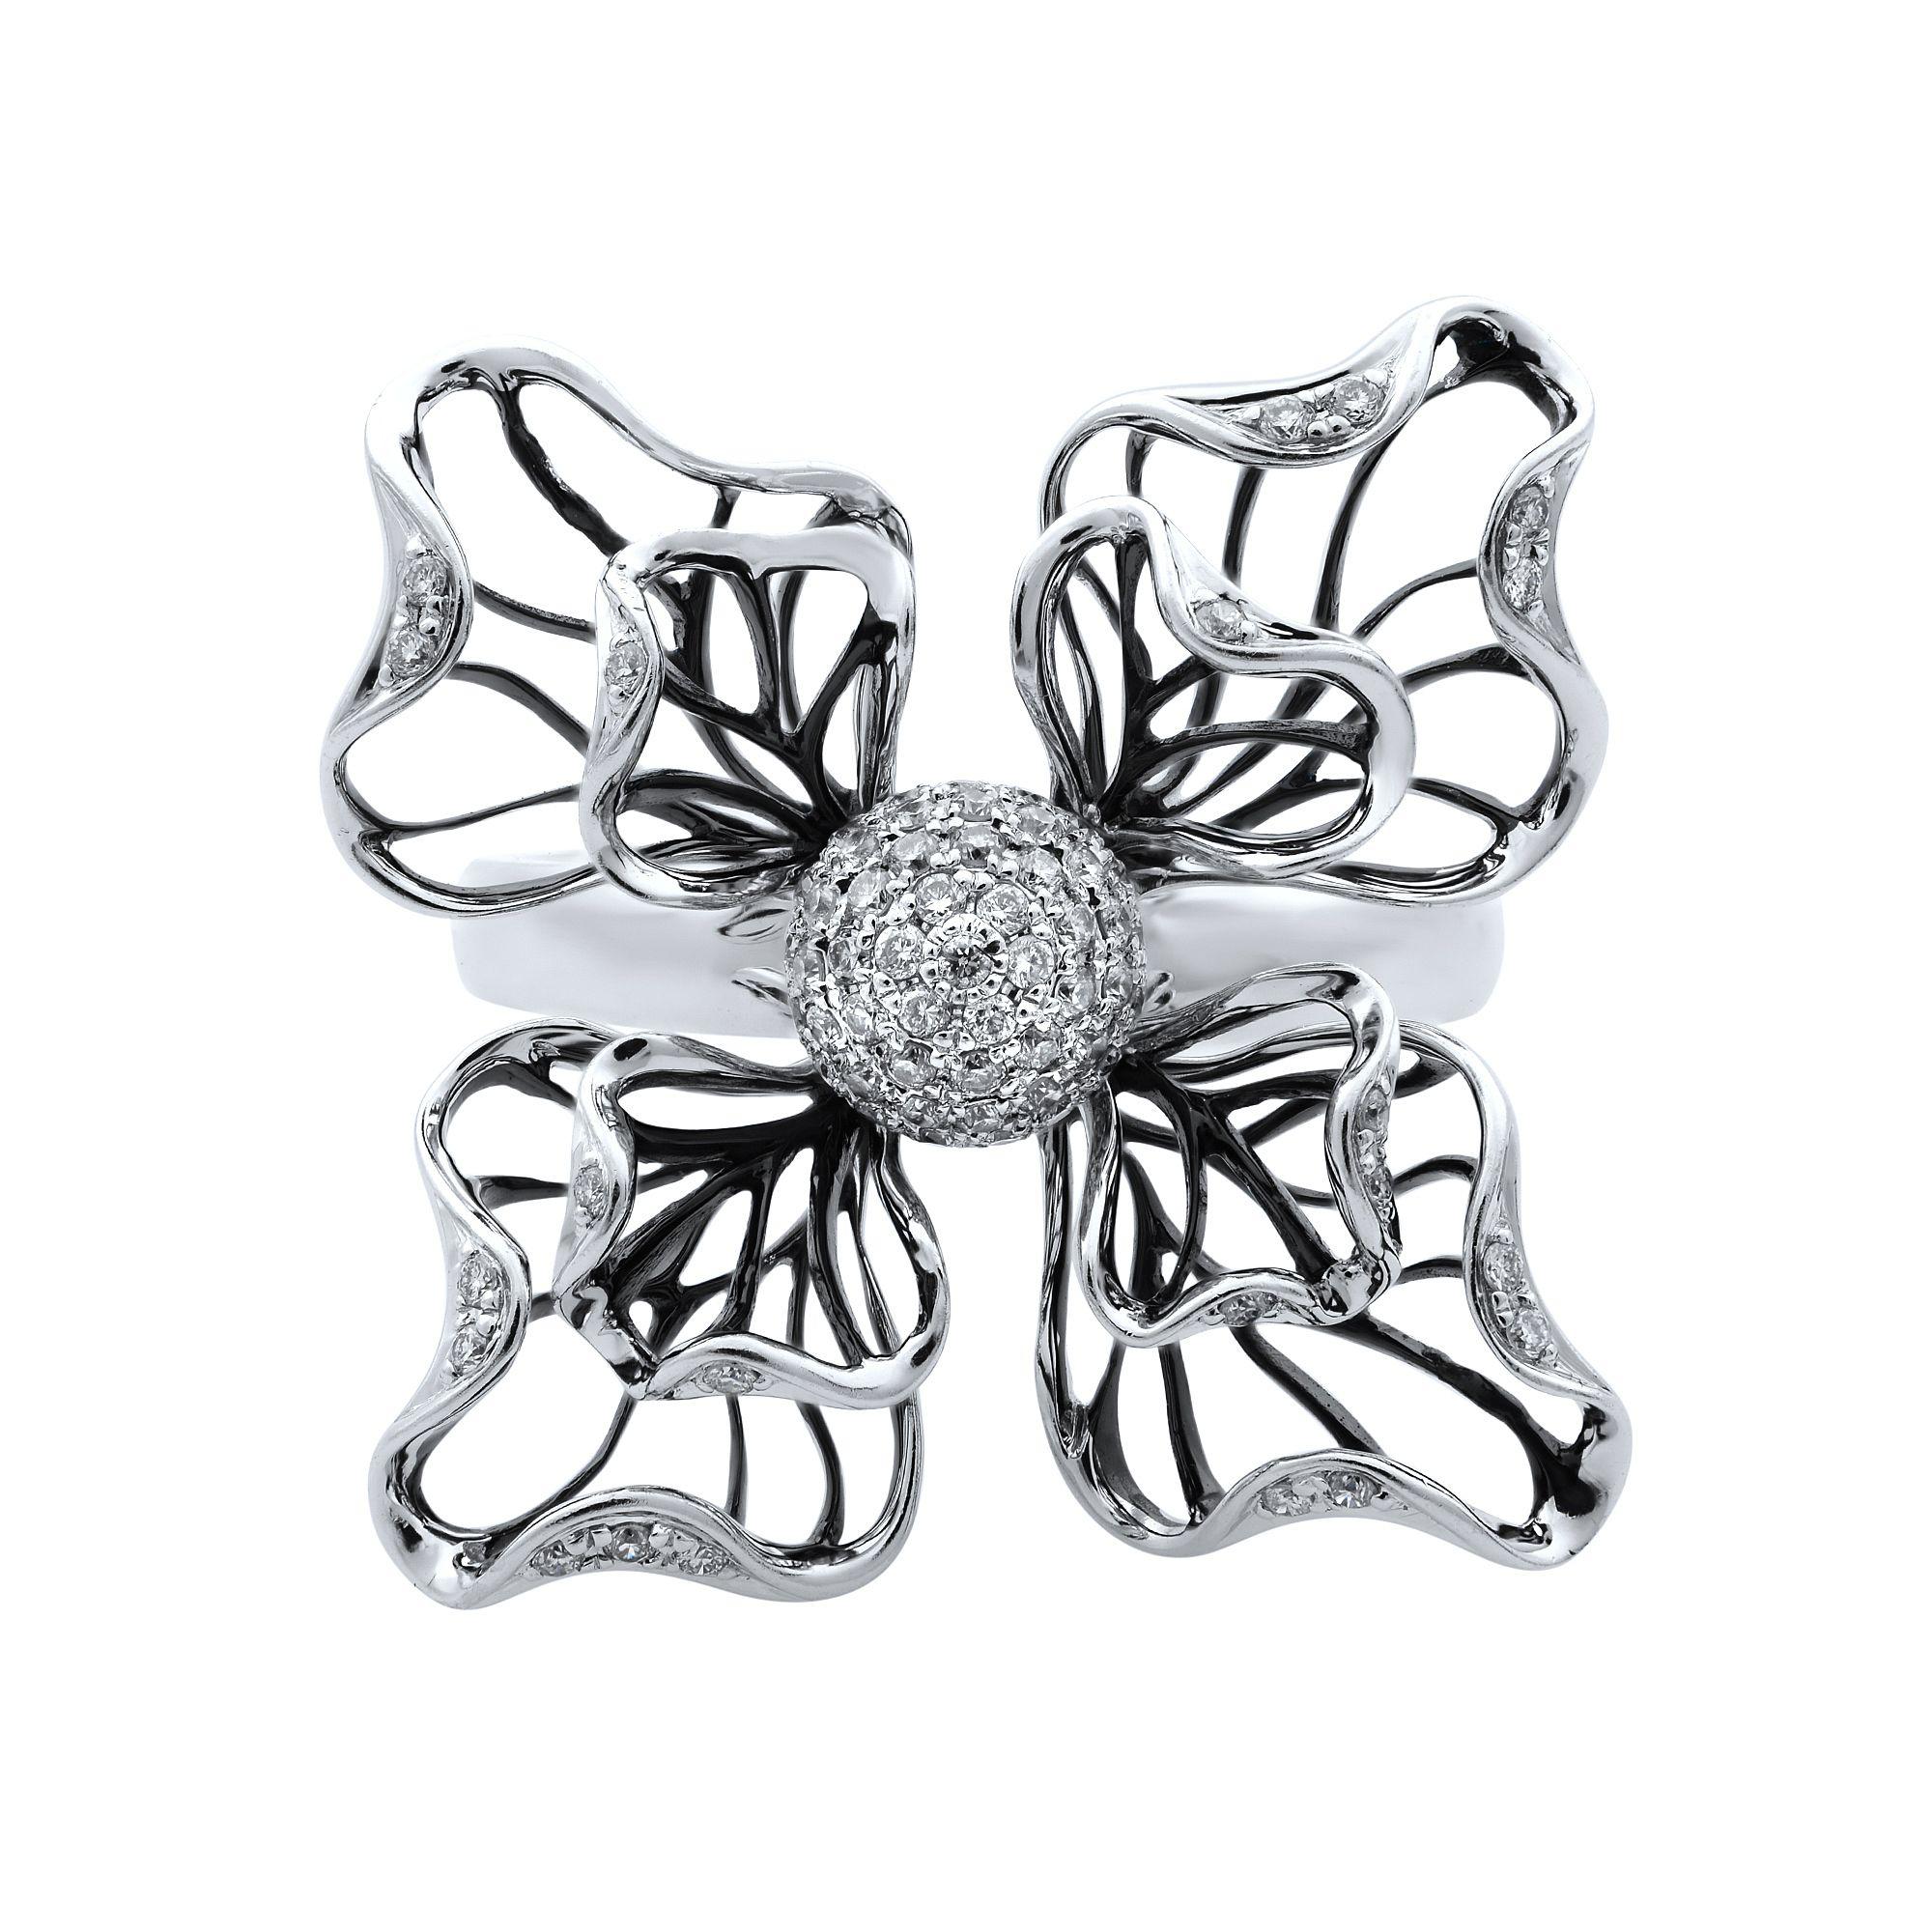 A beautiful unique vintage 18k white gold black rhodium flower cocktail ring, set with 0.35ct of round cut diamonds. Weight: 6.80 g. Ring Size 7. Come with a presentable gift box. 